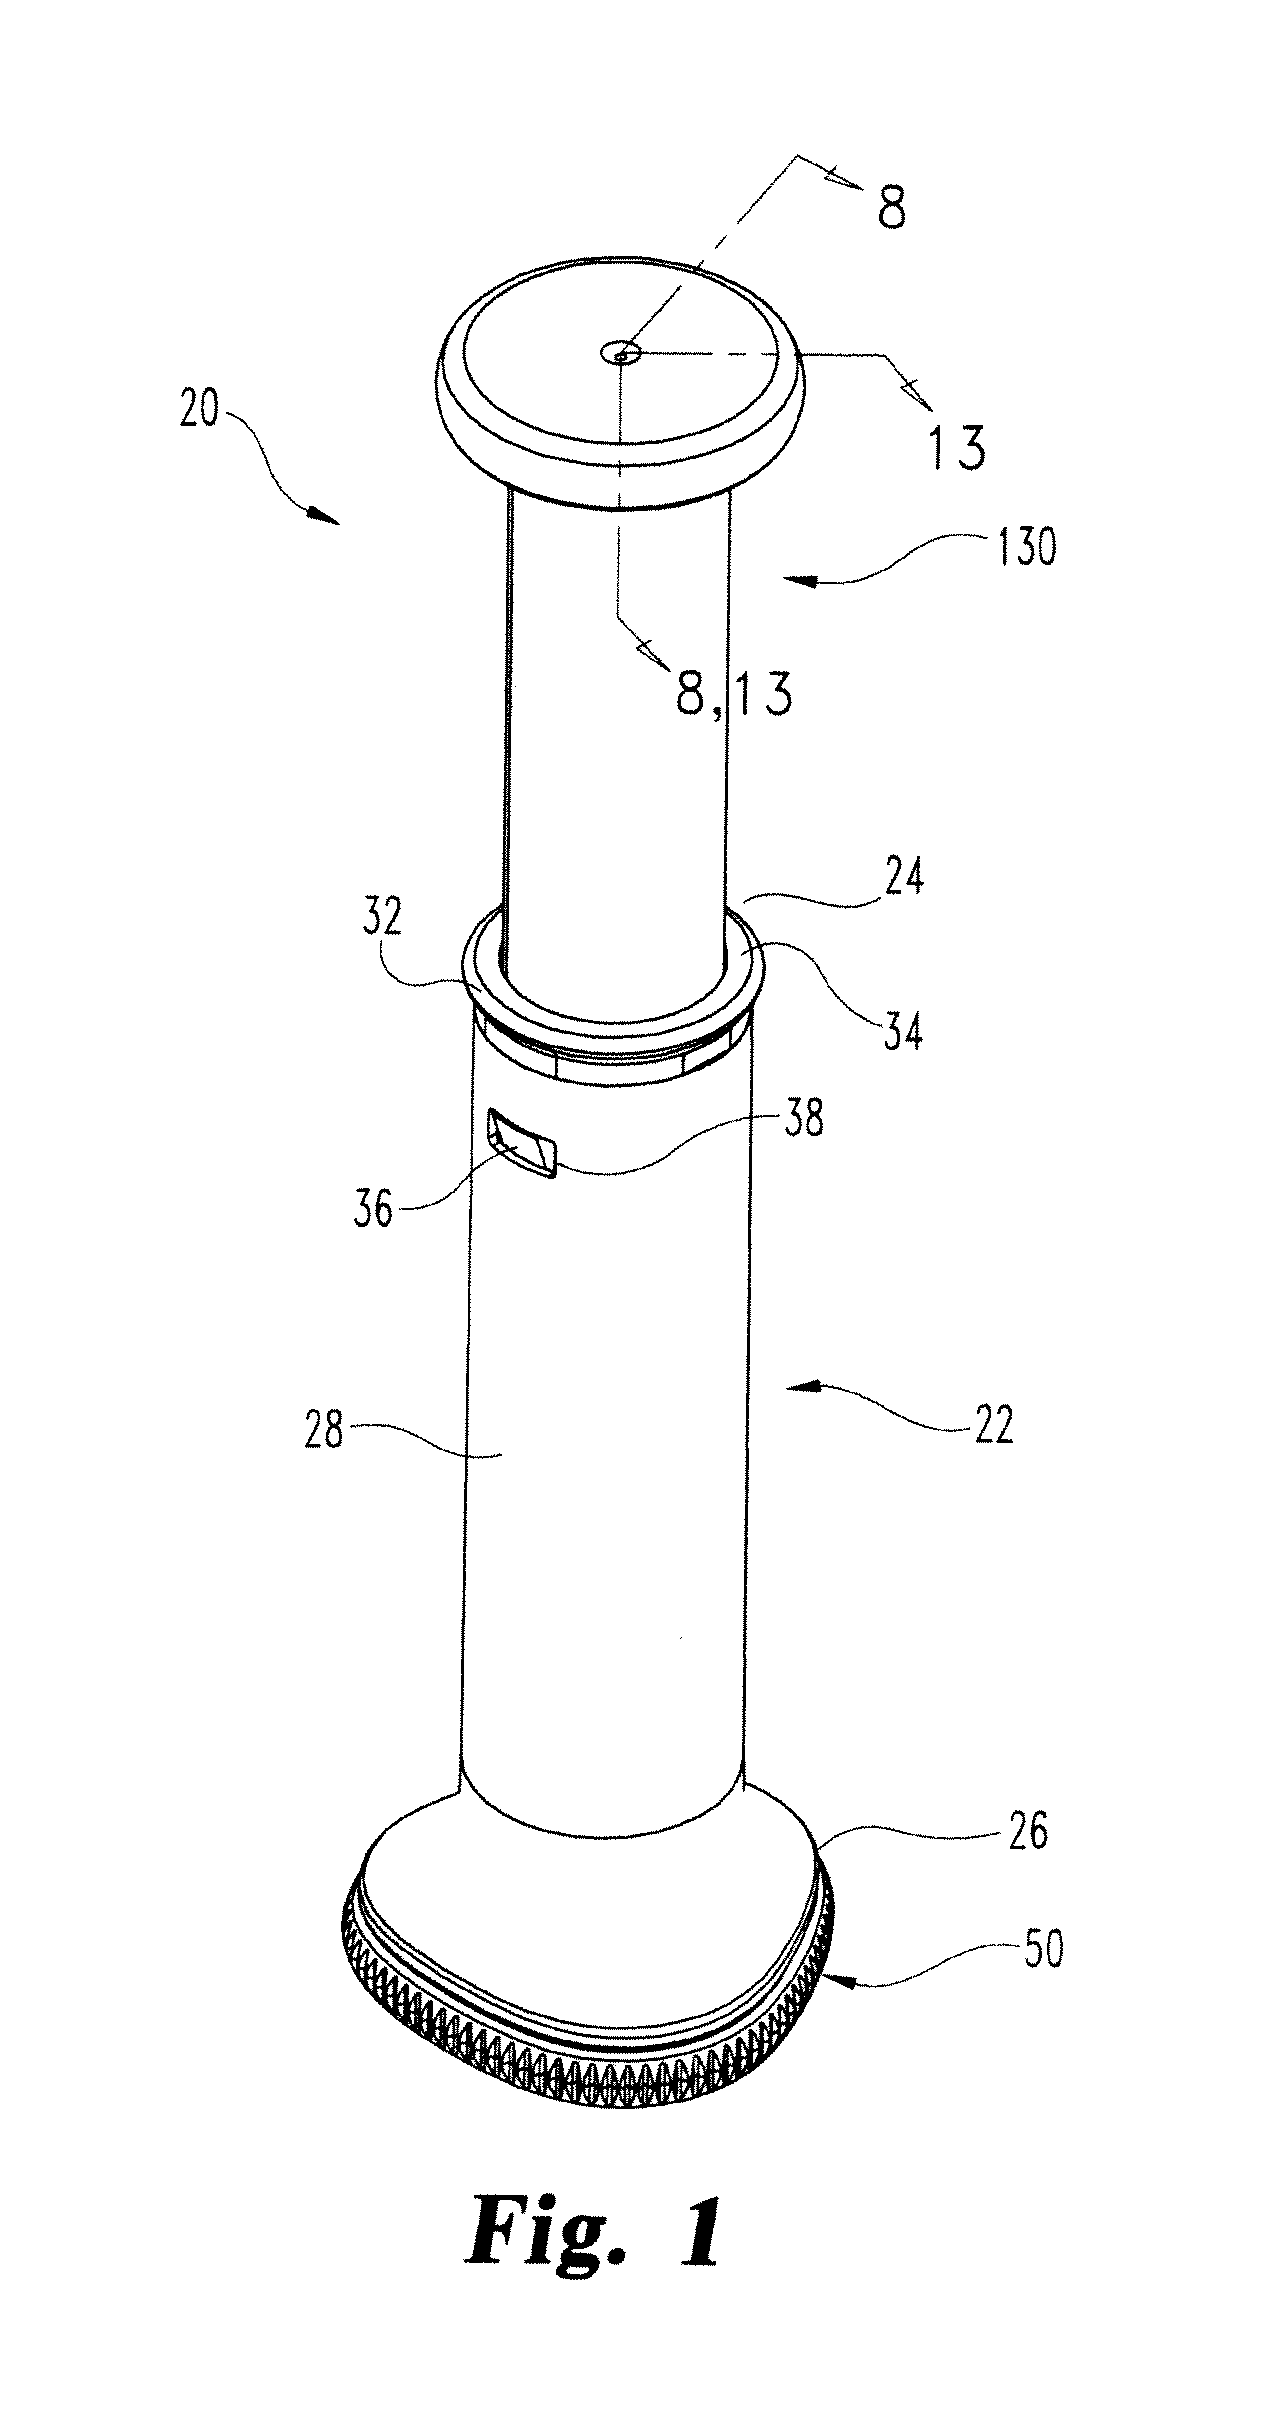 Apparatus for Injecting a Pharmaceutical with Automatic Syringe Retraction Following Injection